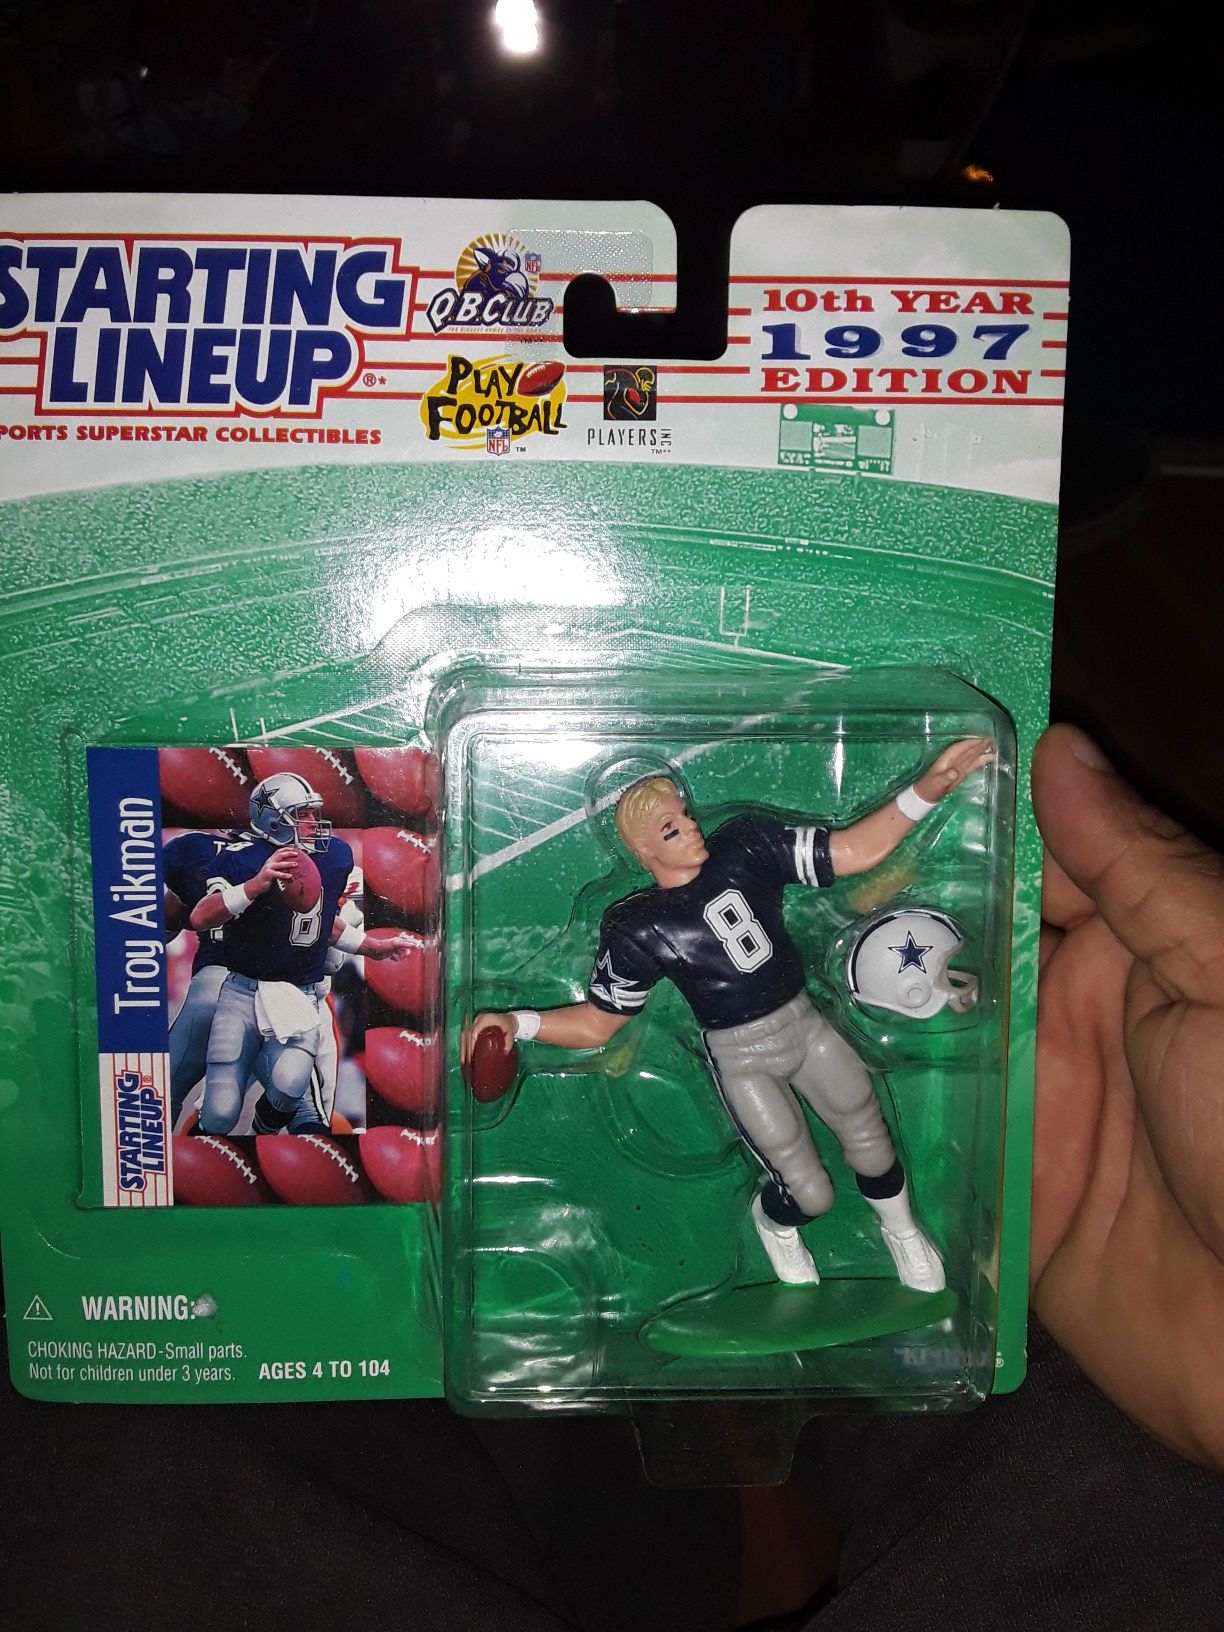 Troy lineup action figure